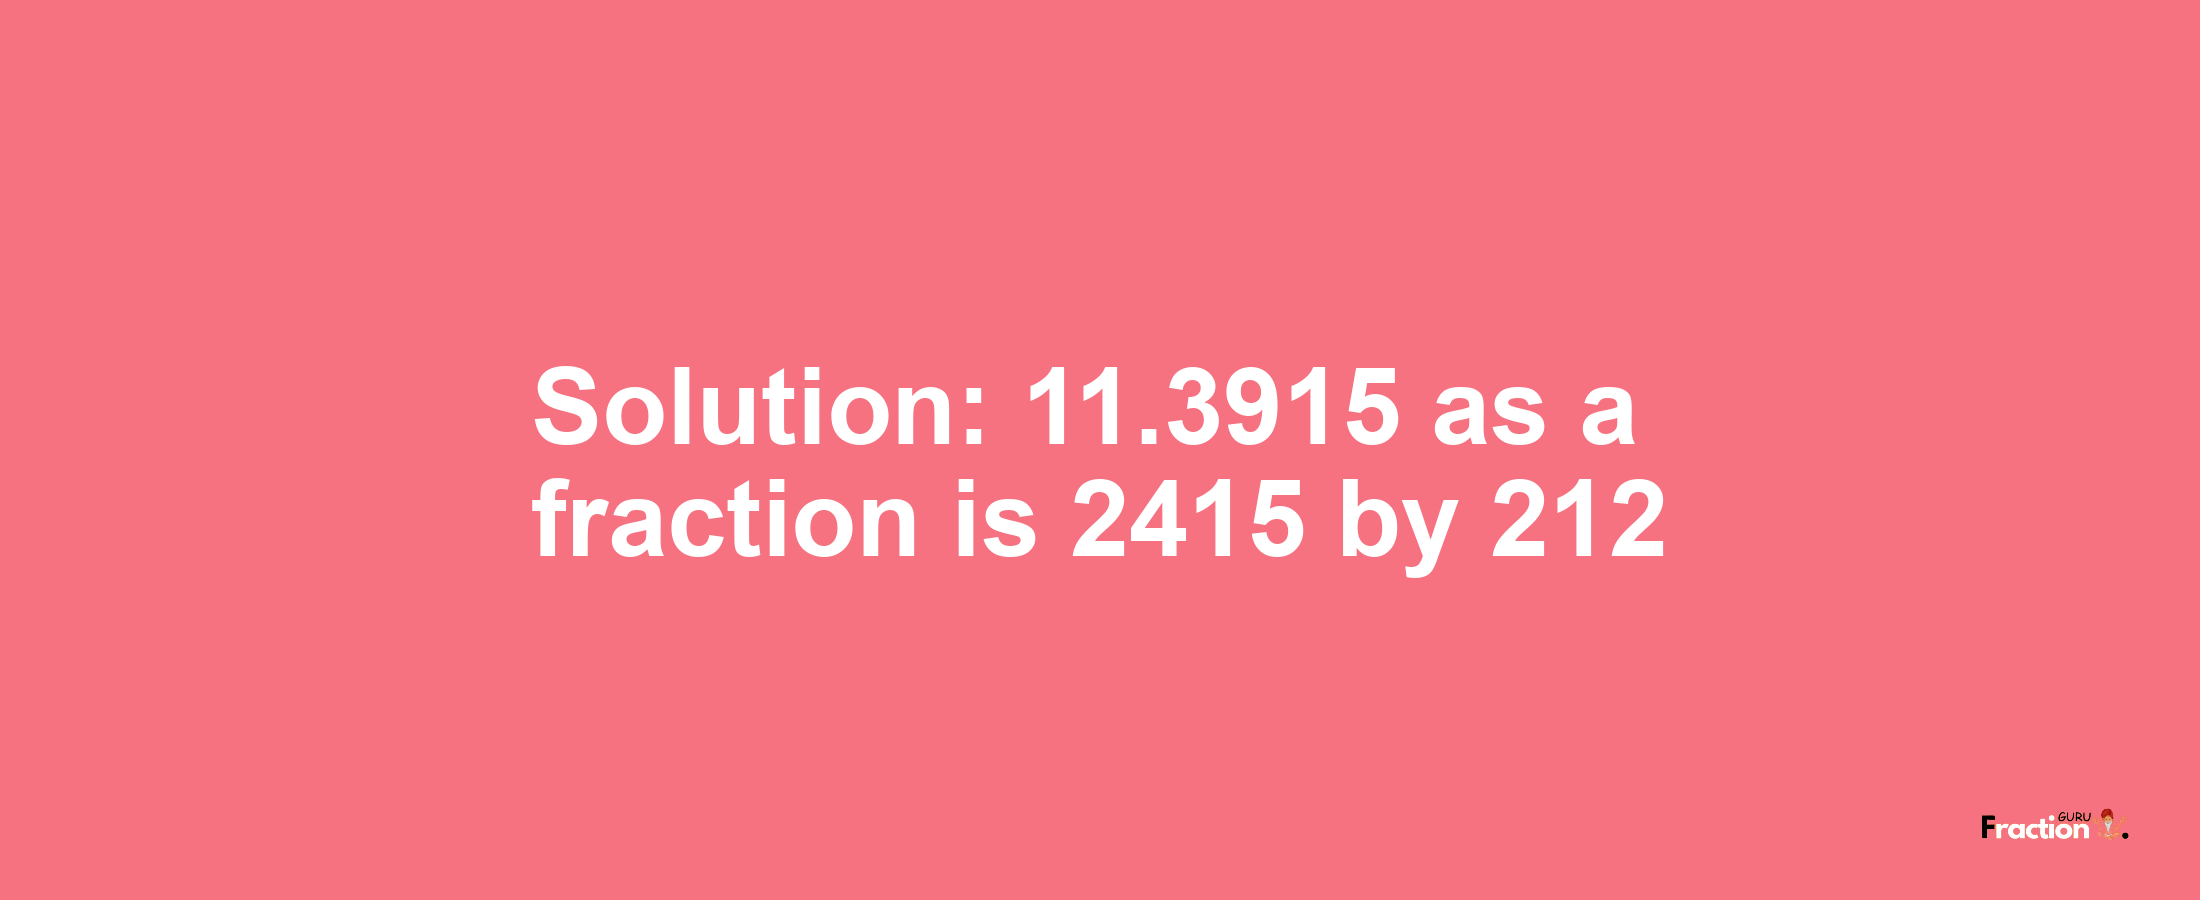 Solution:11.3915 as a fraction is 2415/212